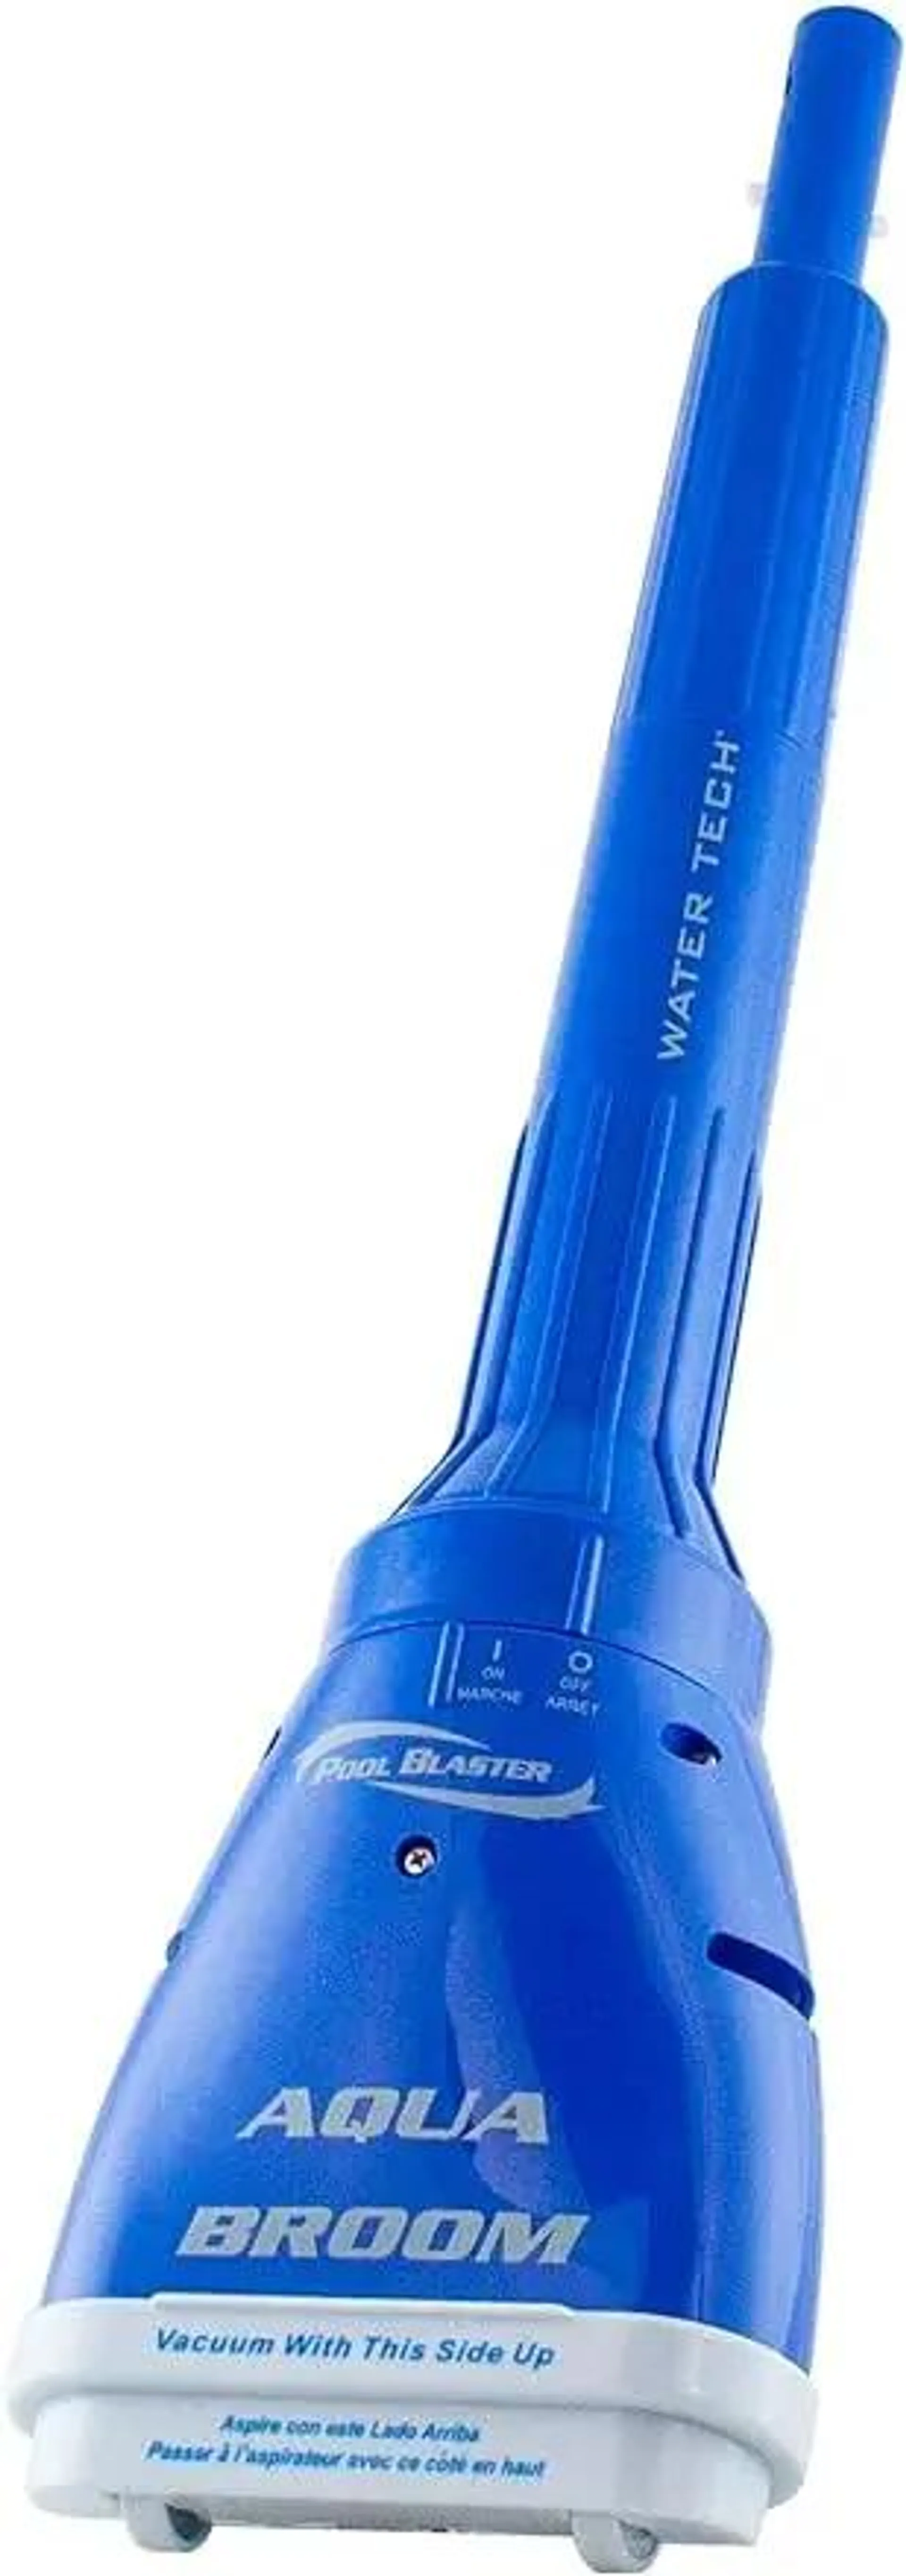 POOL BLASTER Aqua Broom Cordless Vacuum for Spa, Small Pool & Tight Spaces, Ideal for Sand, Silt & Dirt